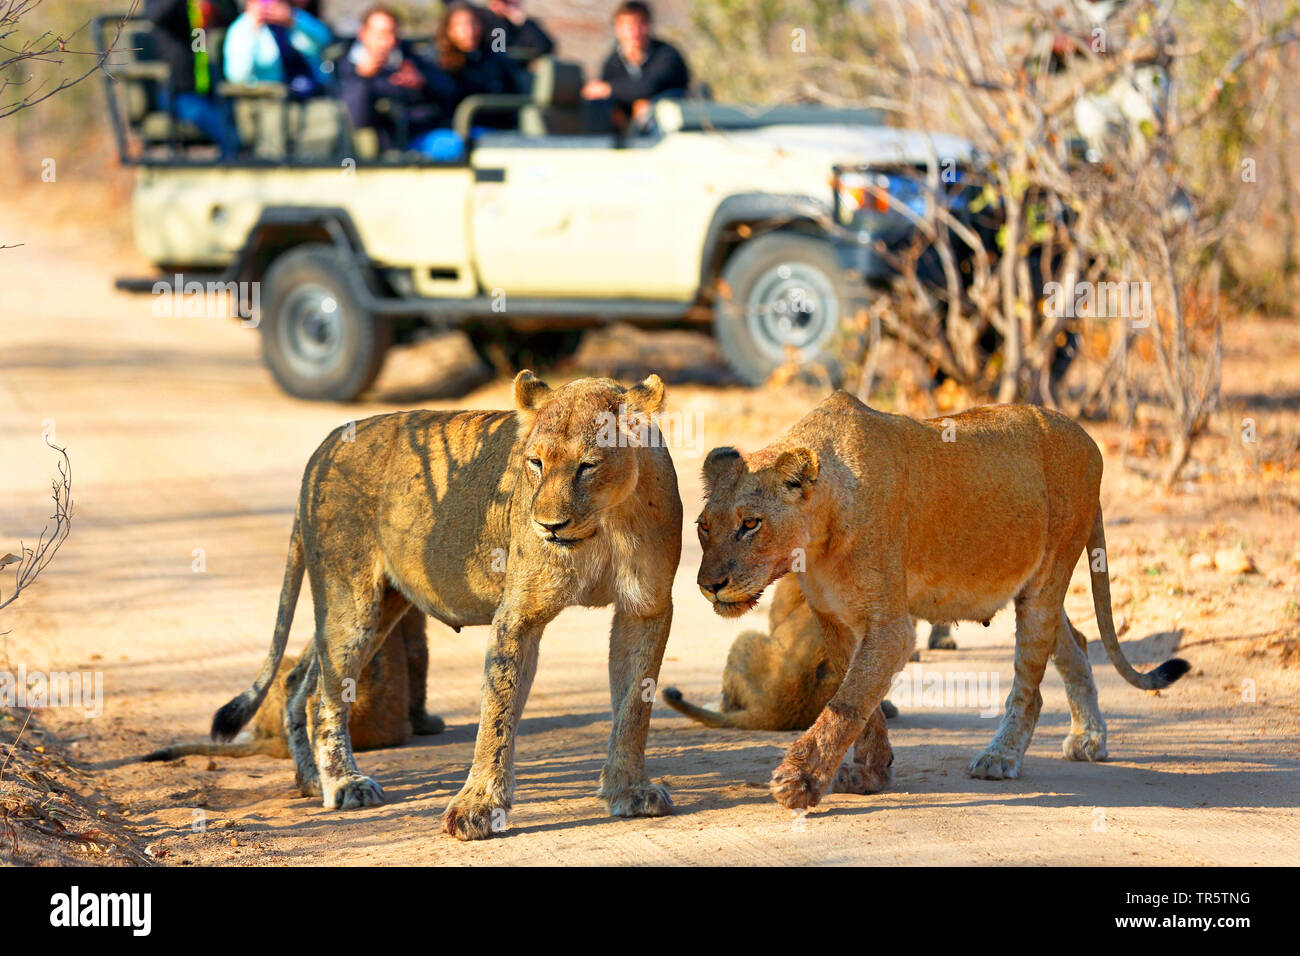 lion (Panthera leo), tourists in a jeep observing lioness with cubs , South Africa, Sabi Sand Game Reserve Stock Photo